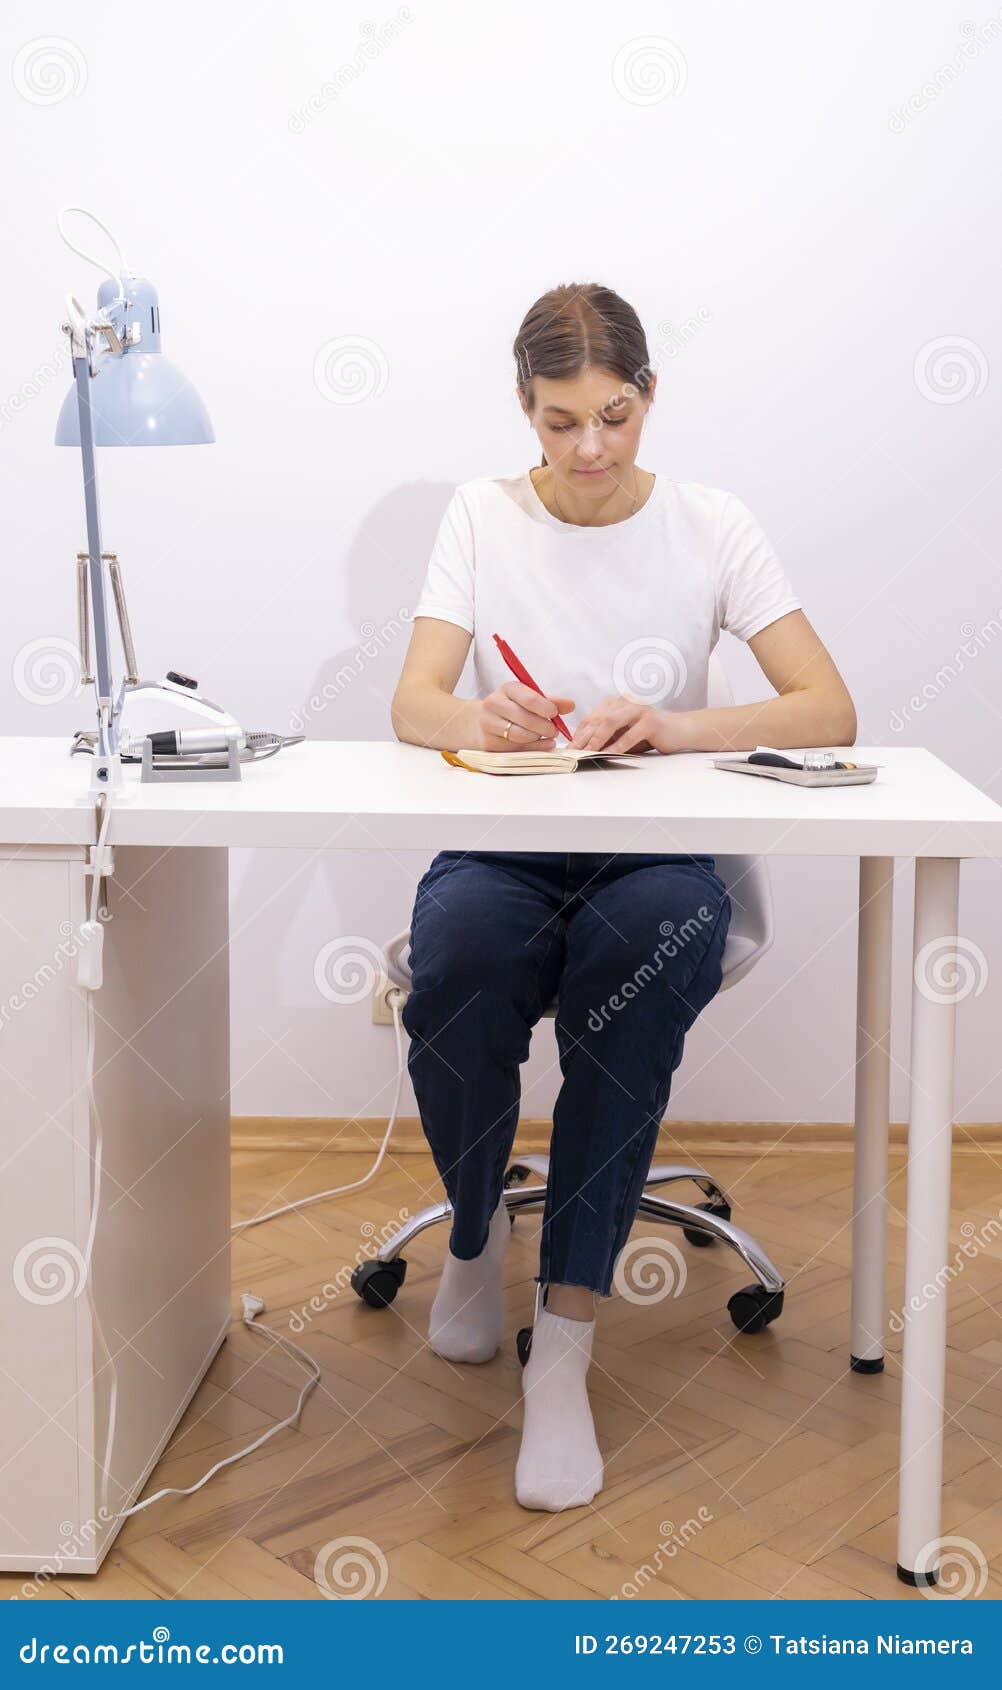 nail beautician makes notes in notebook with pen, sitting at workstation, table in